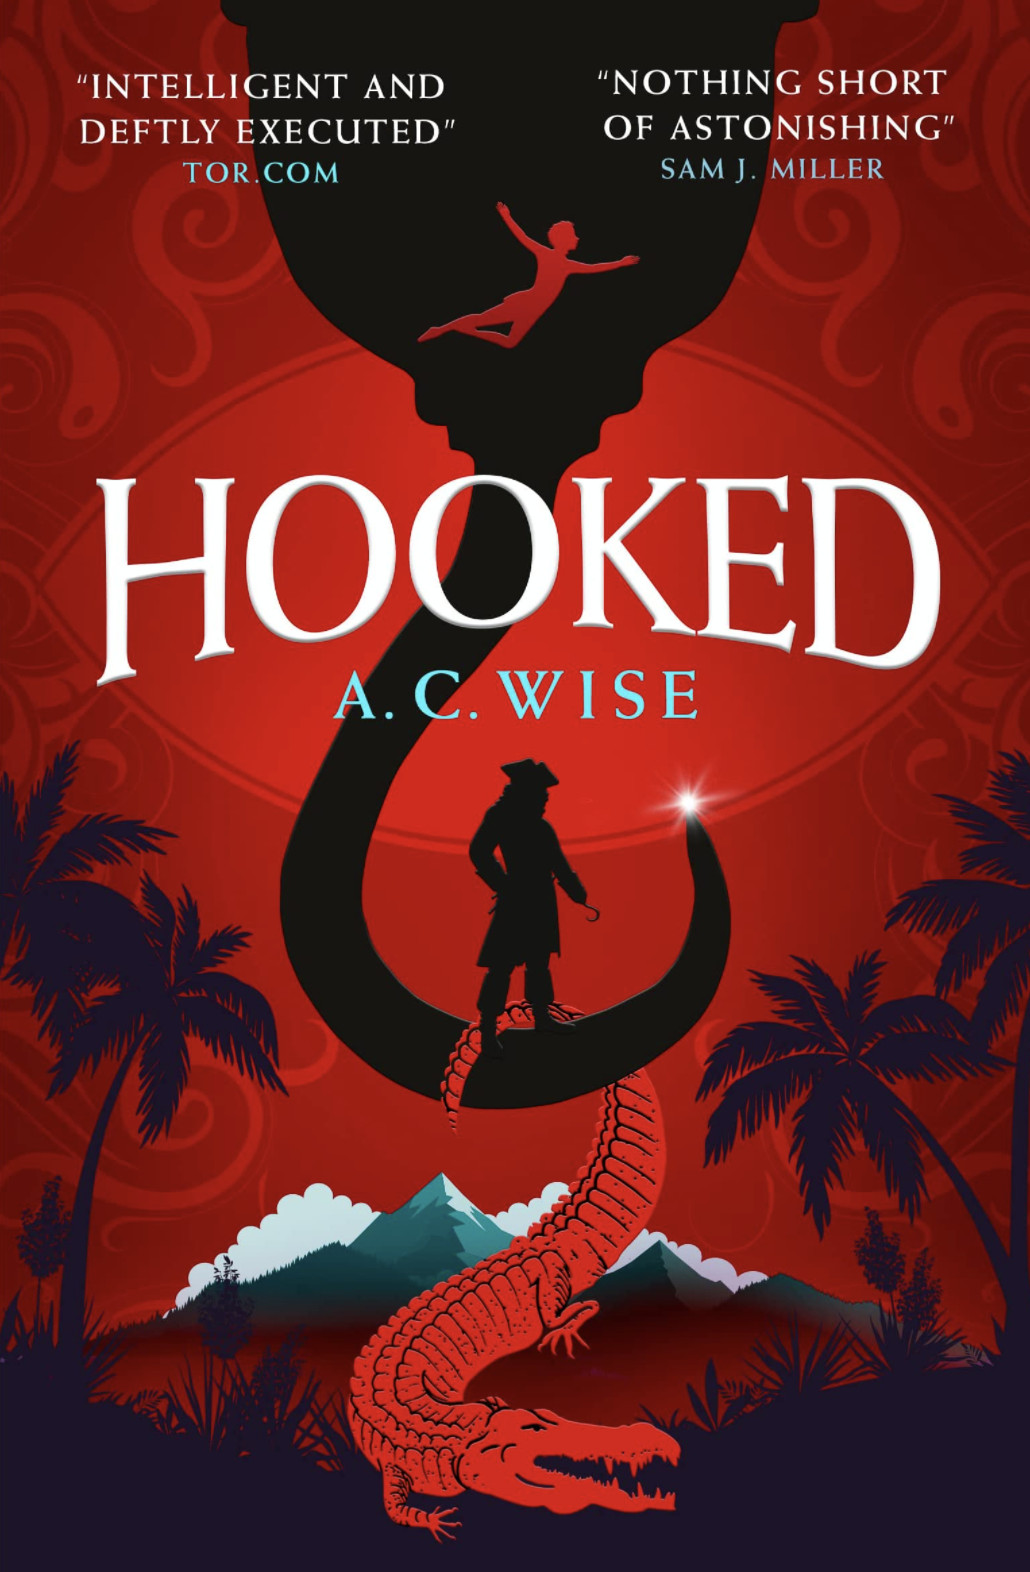 The cover for Hooked which shows an illustration of a pirate standing in the crook of a large hook above a crocodile